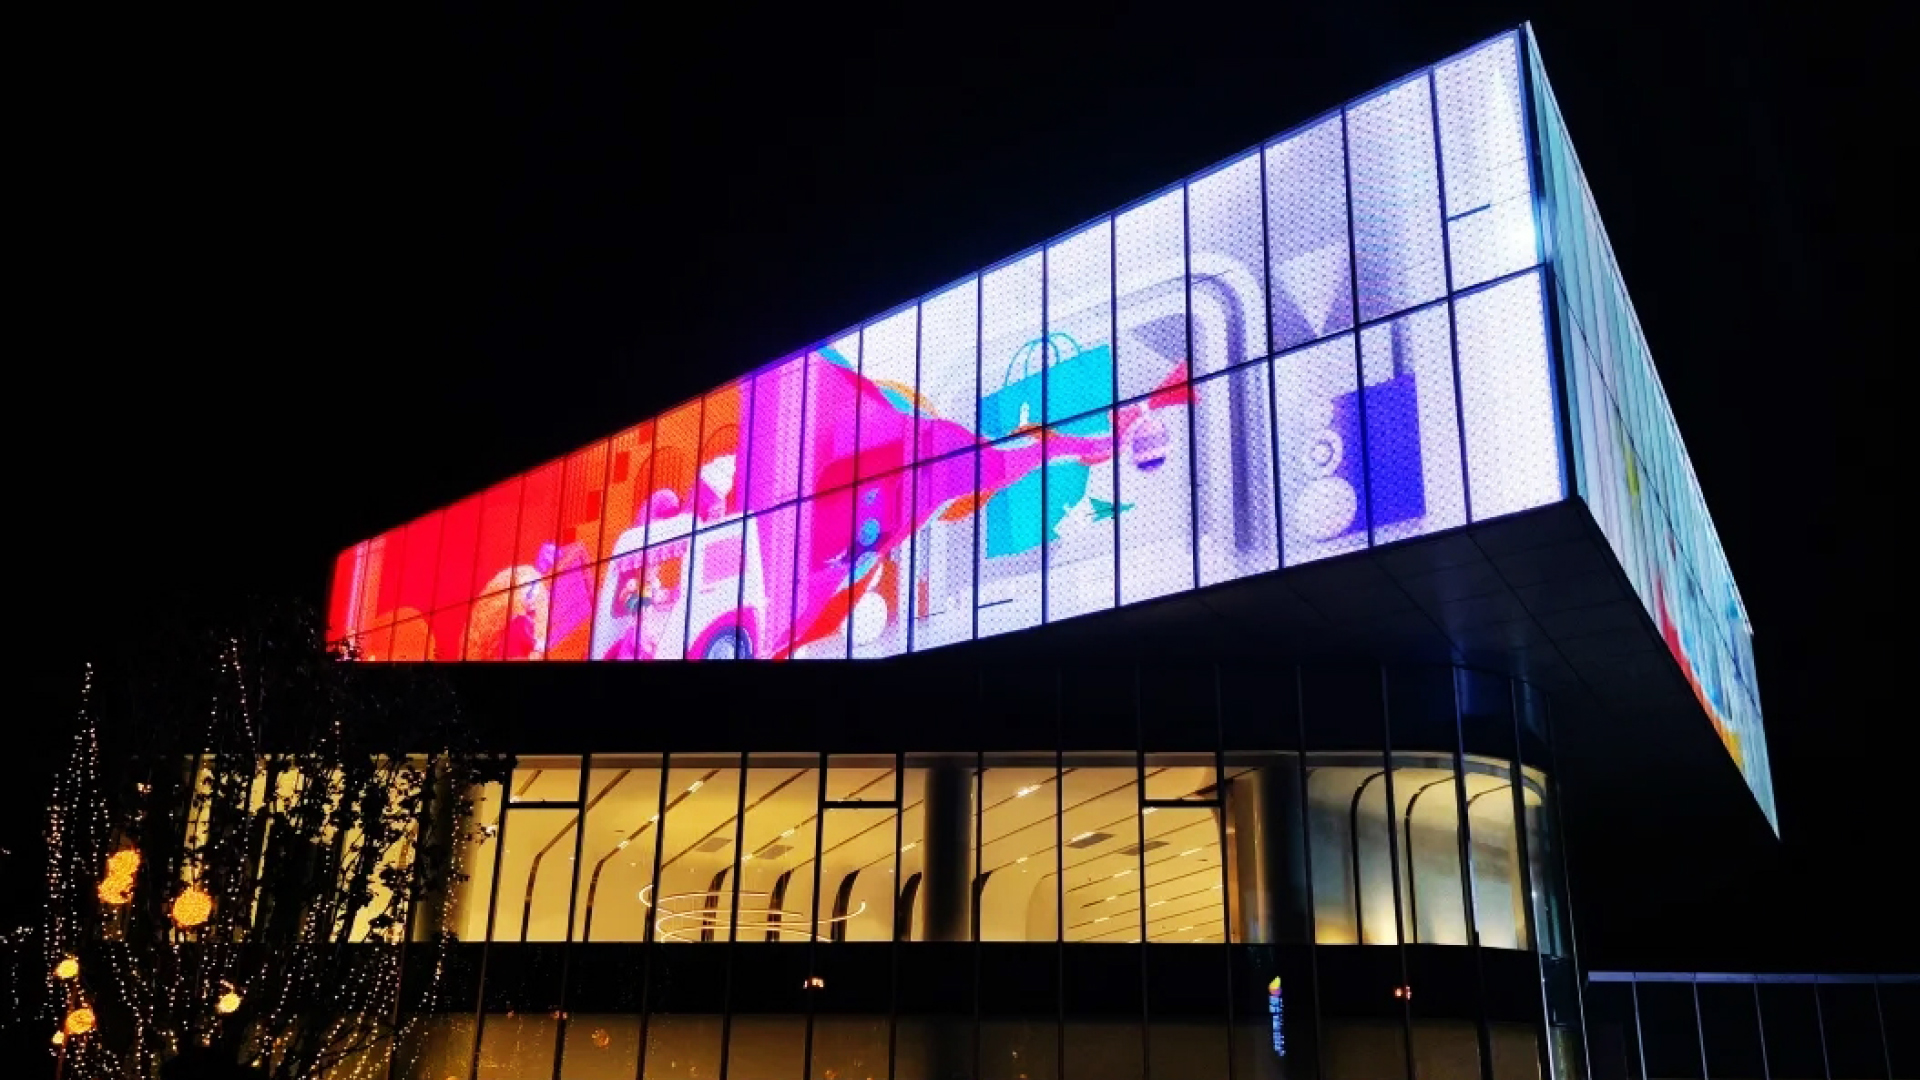 Transparent Led Display For Shopping Mall